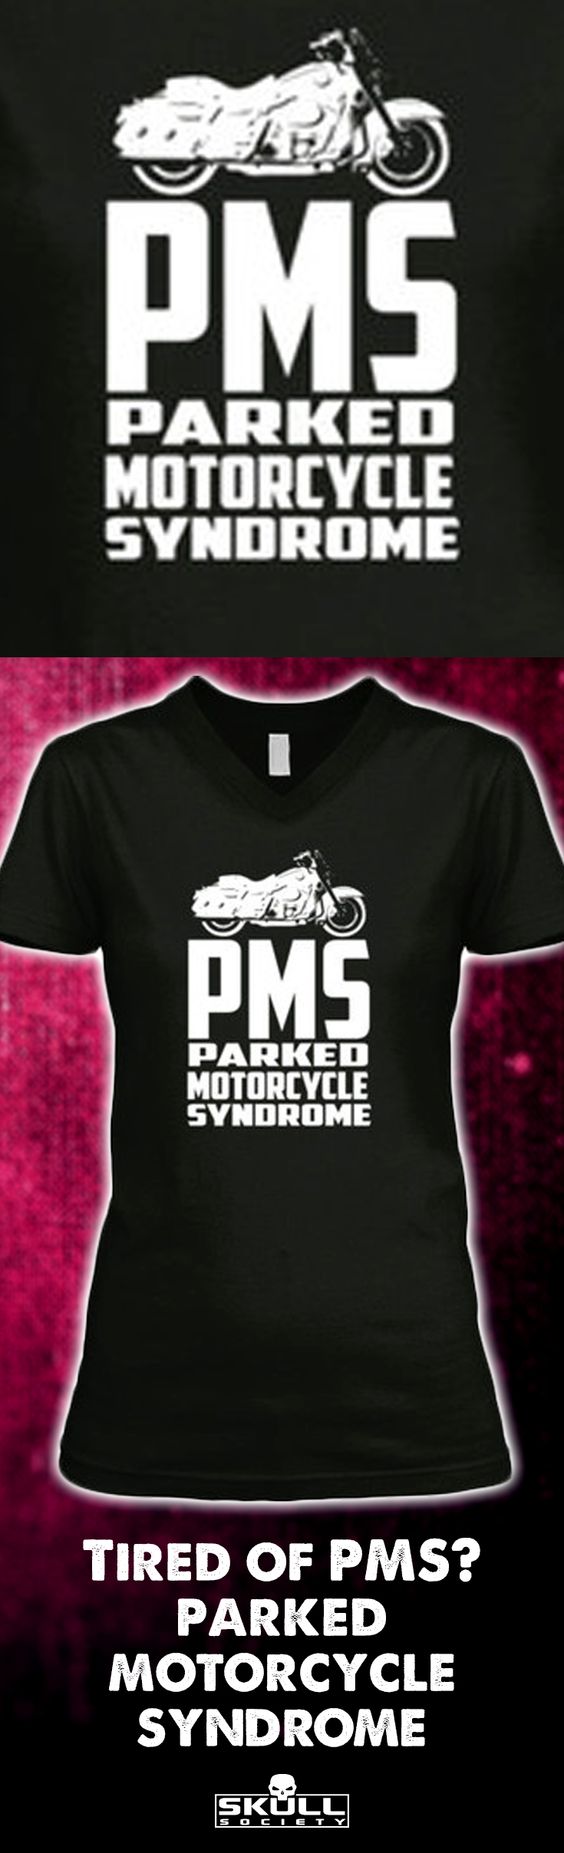 Are you dealing with PMS? Parked Motorcycle Syndrome? LOL! You'll get lots of attention in this funny biker tee. Exclusively designed & printed in the USA! CLICK HERE TO ORDER!